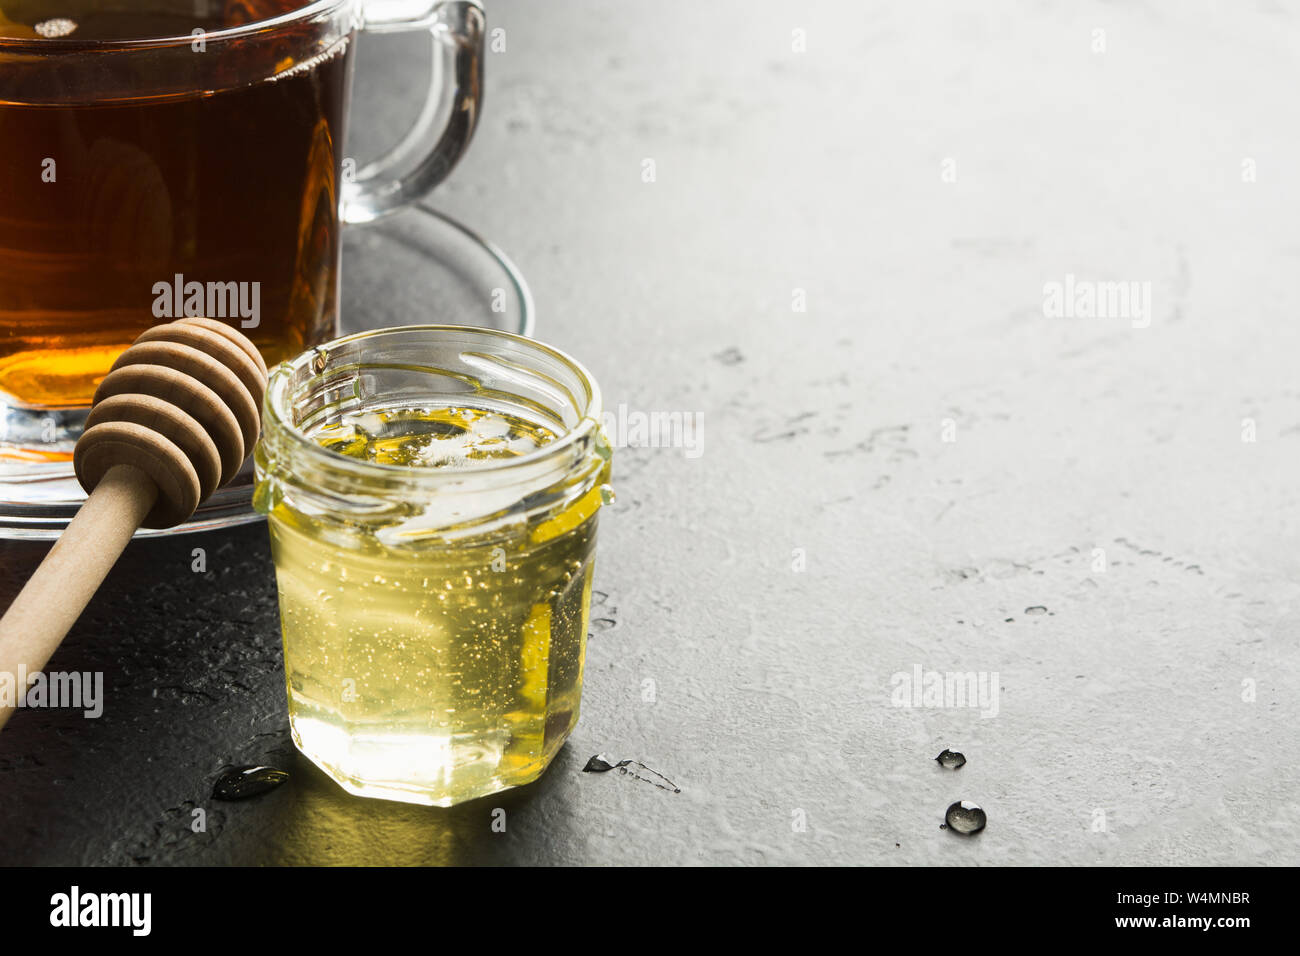 Flower light organic honey in glass jar with tea with wooden stick on dark background with copy space. Folk remedy against flu in rainy season. Autumn Stock Photo